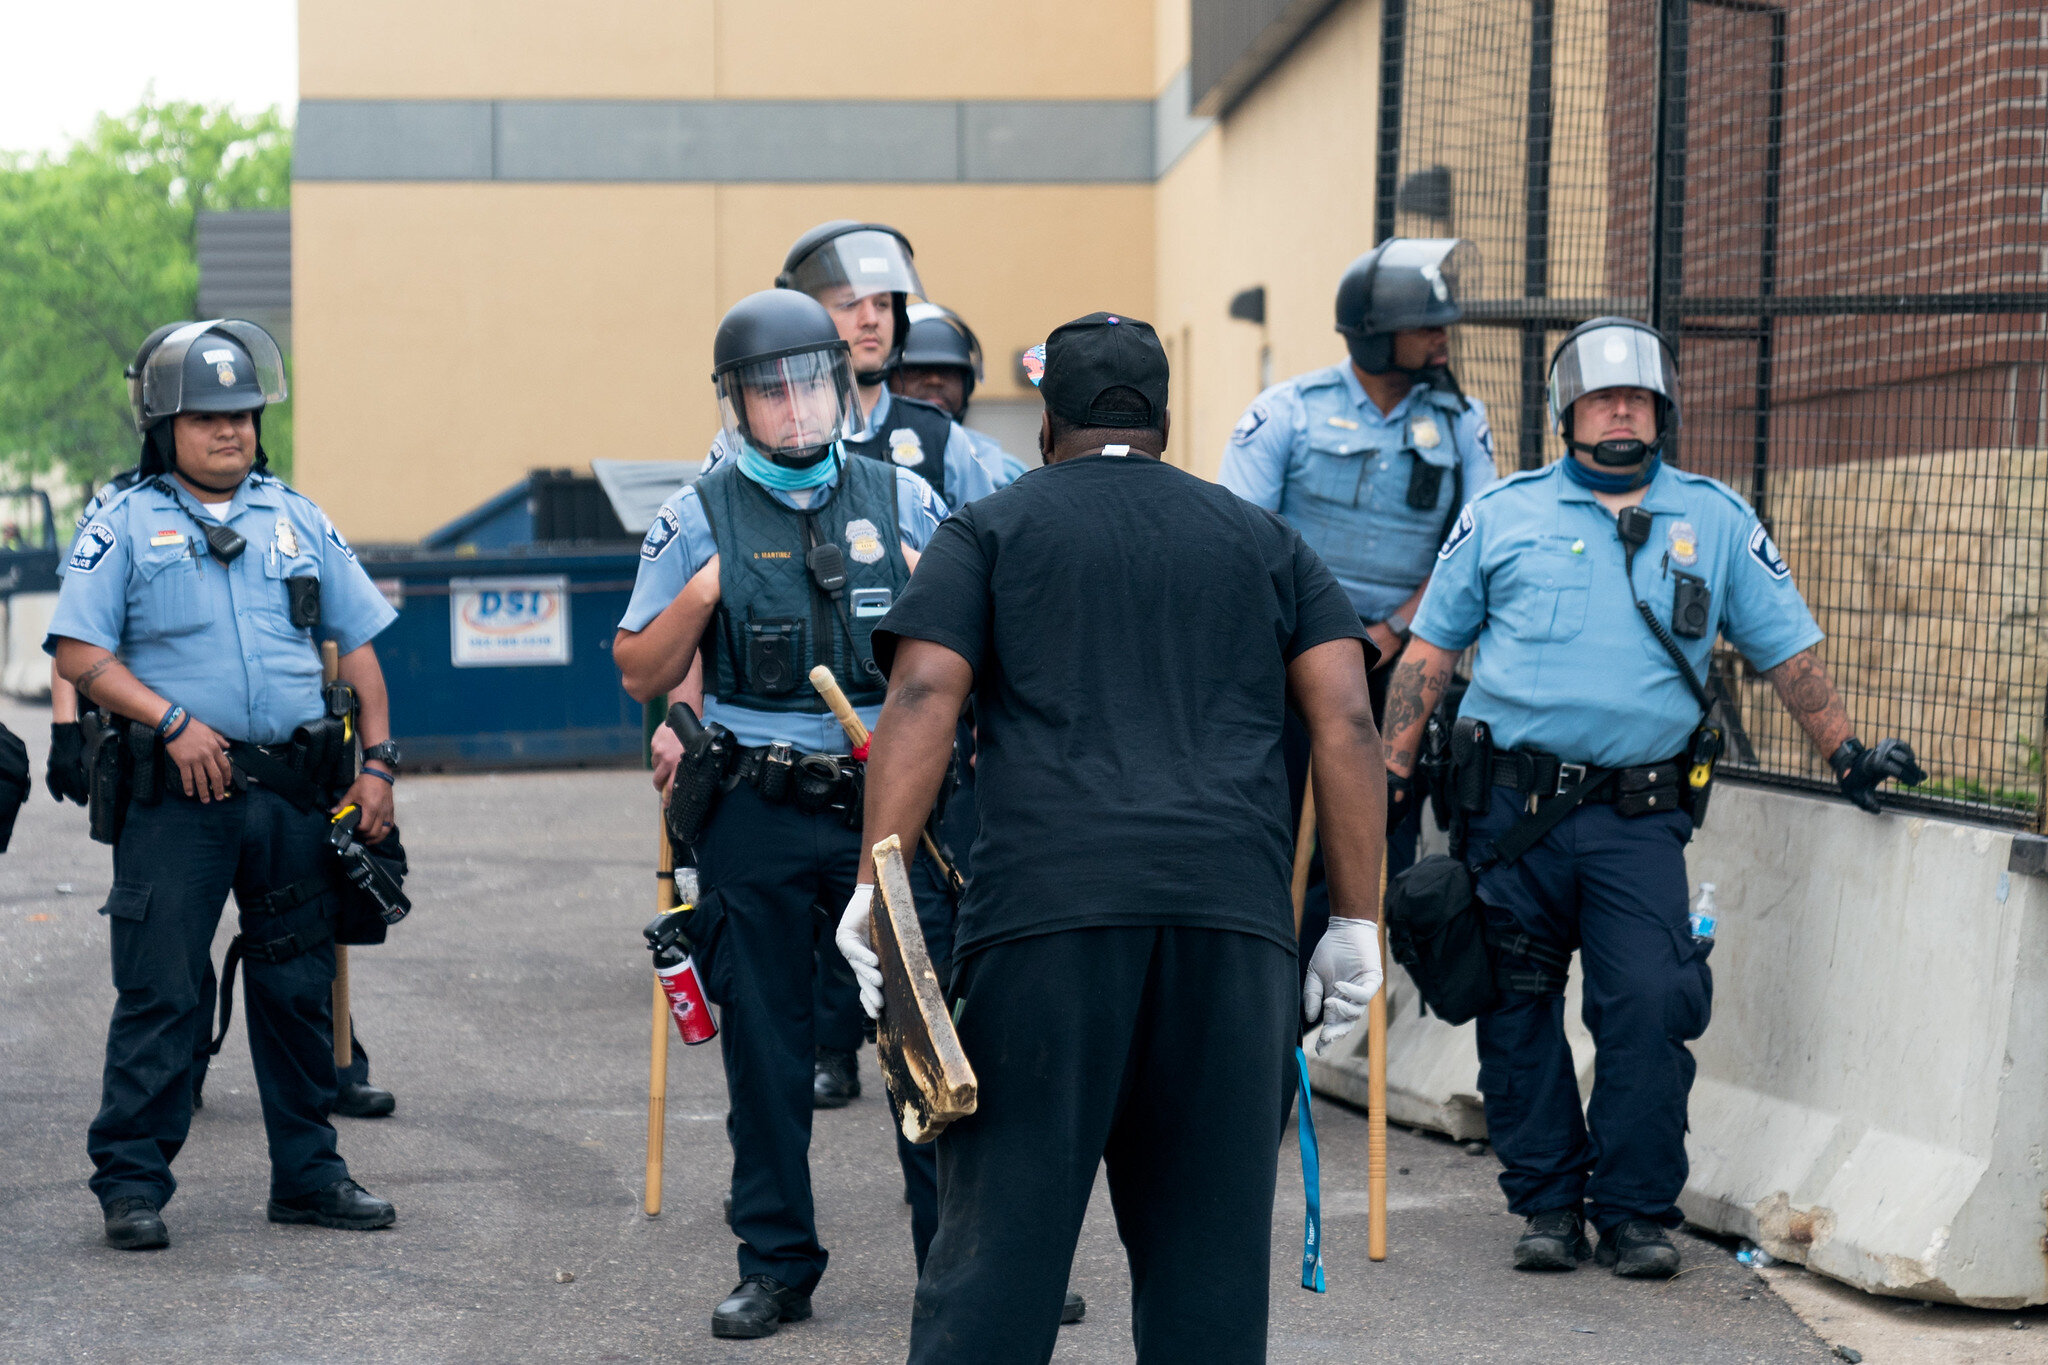  A protester confronts police officers outside the 3rd Police Precinct on Thursday morning in Minneapolis, Minnesota 